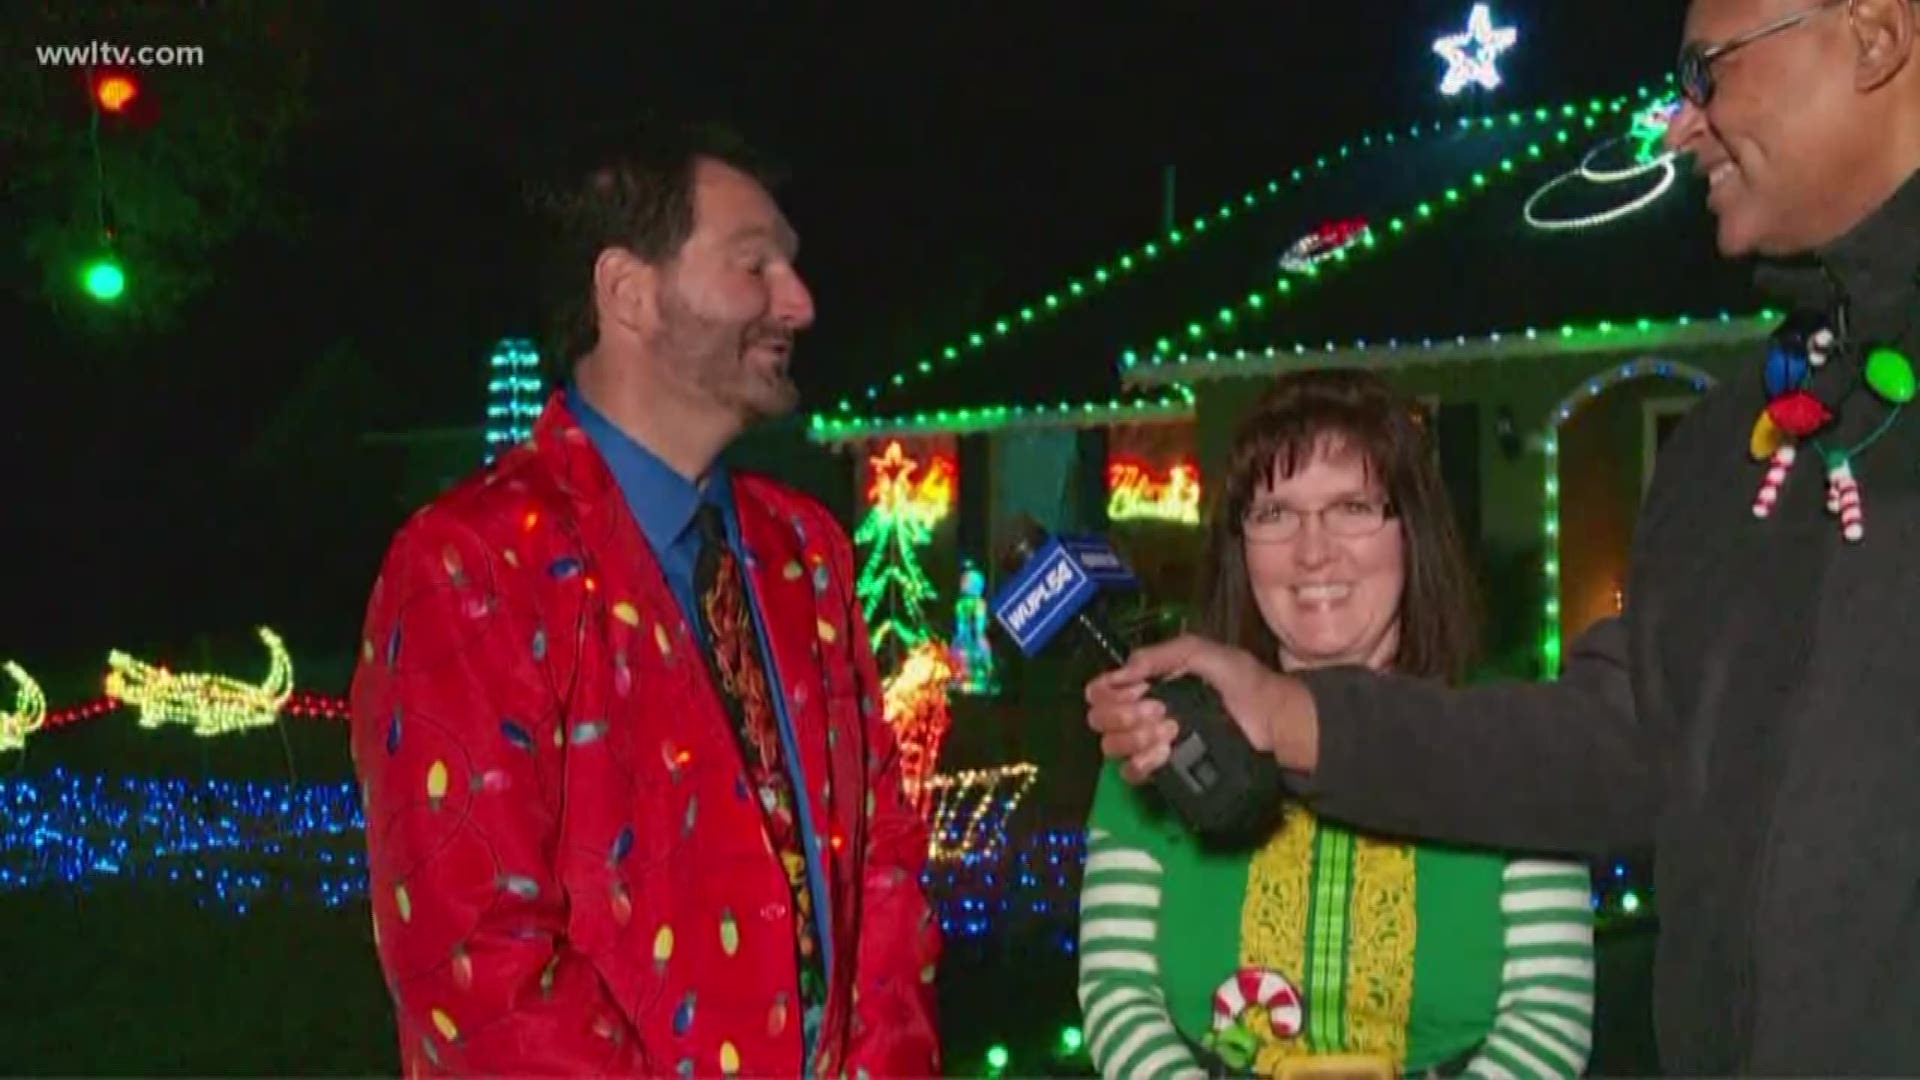 Kevin talks to Joel and Laurie Miller, the masterminds behind this beautiful Christmas Lights display.